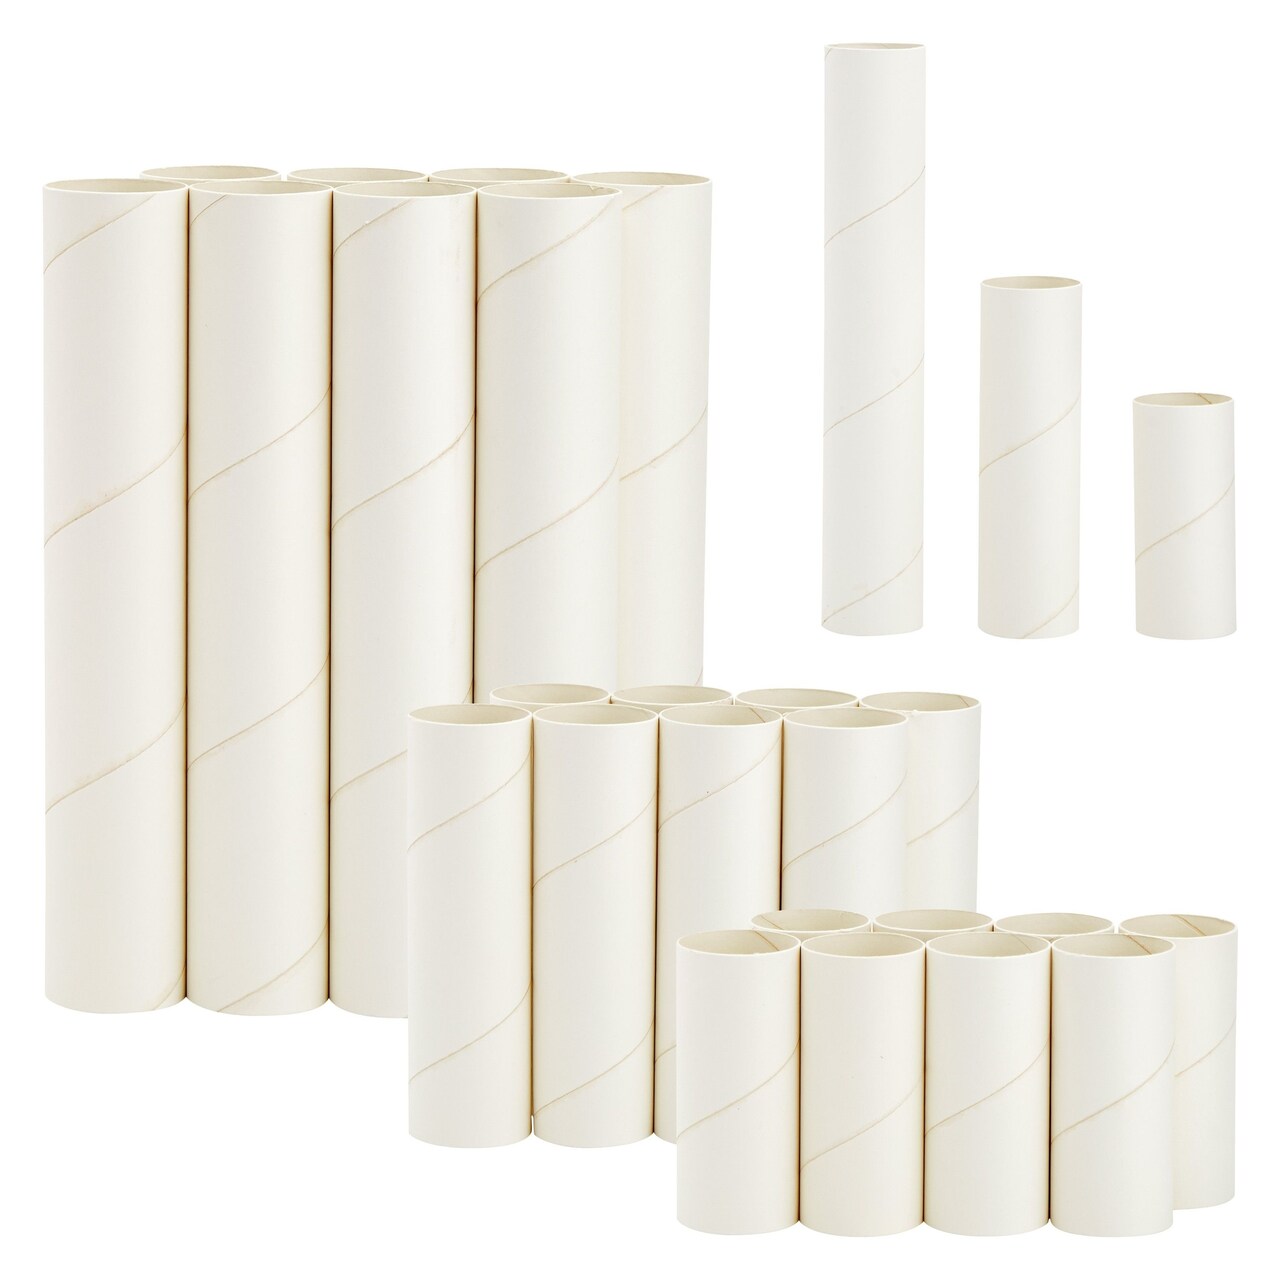 24 White Cardboard Tubes for Crafts, Empty Paper Rolls, Cylinders in 3  Sizes for DIY Art Projects (4, 6, and 10 Inches)